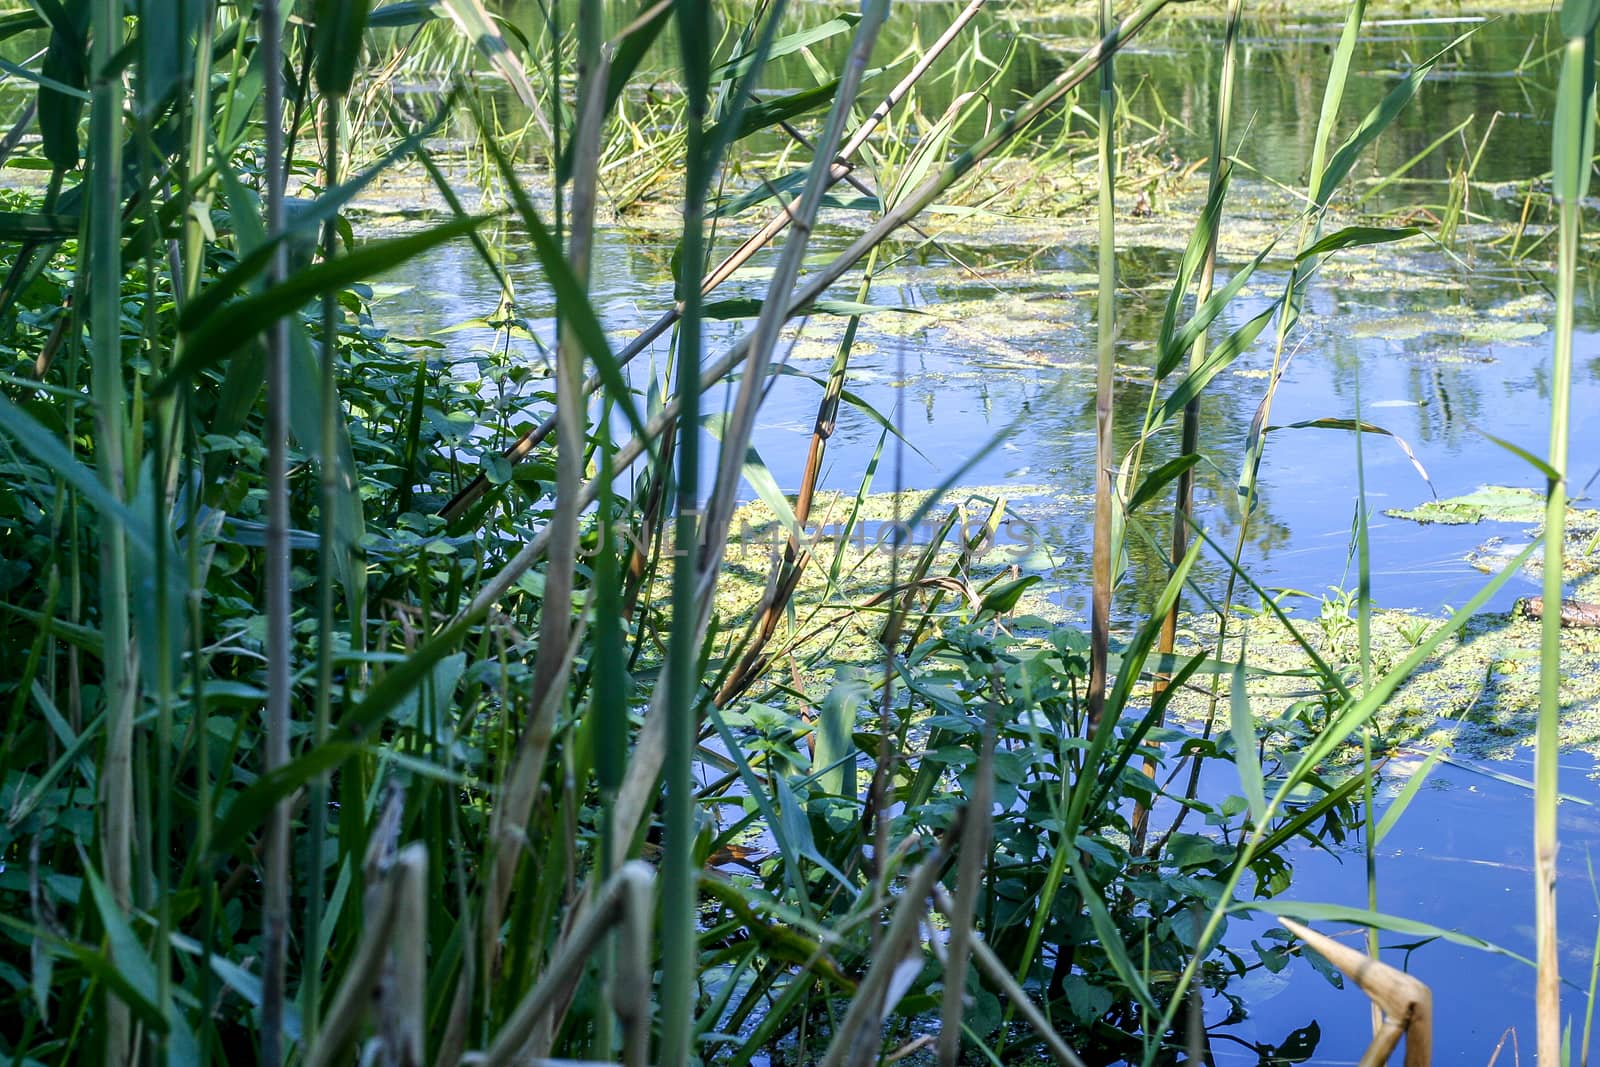 A pond full of plants in a forest wild nature scene